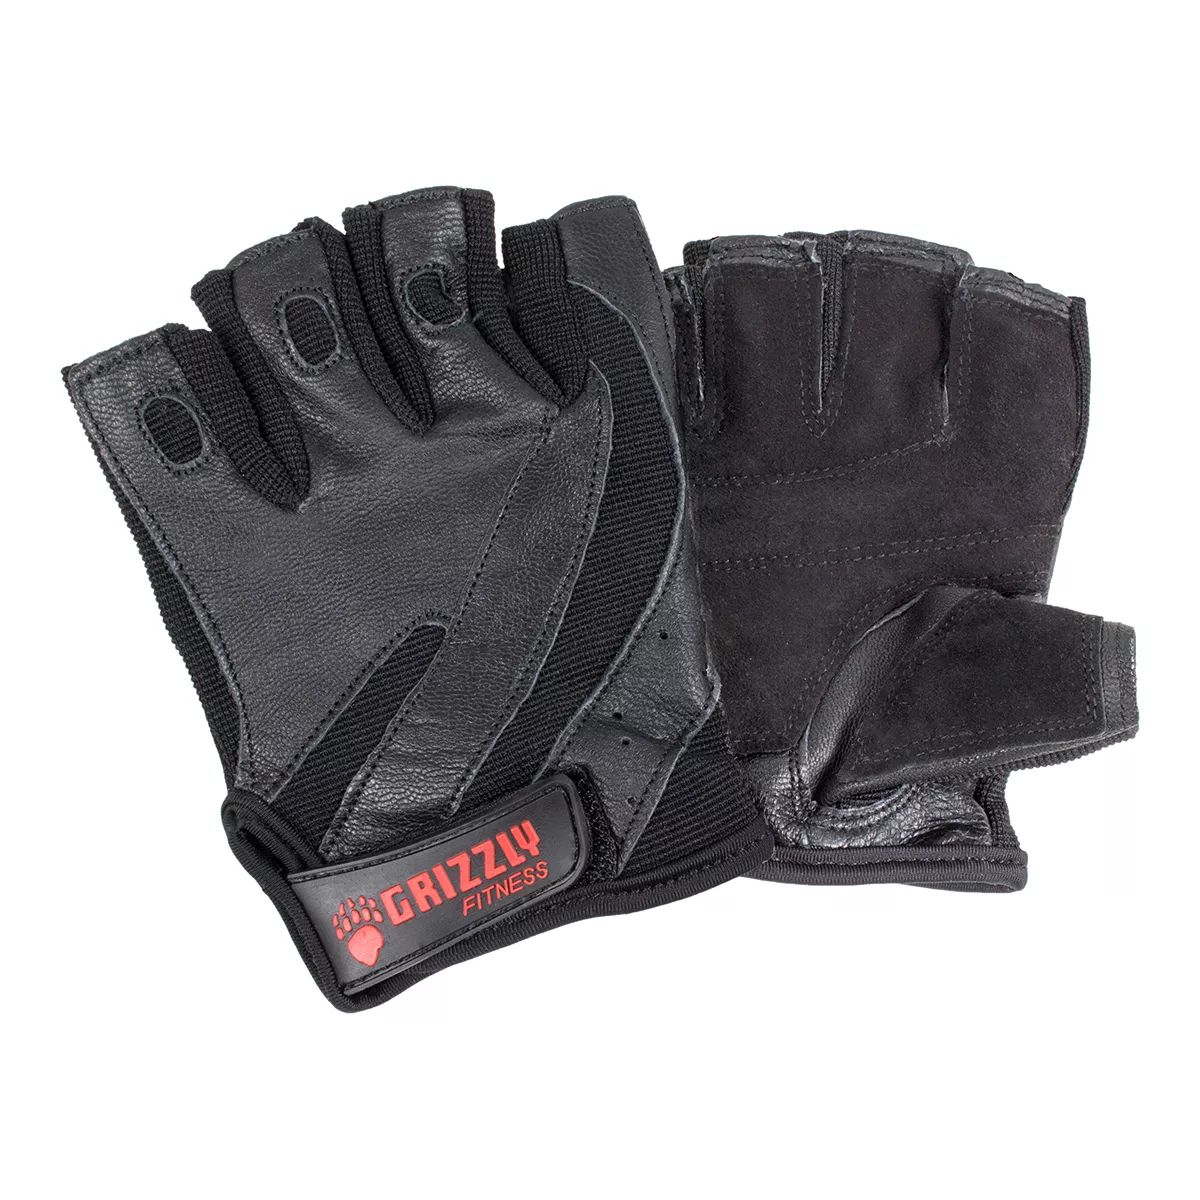 Grizzly Men's Voltage Weight Lifting Gloves